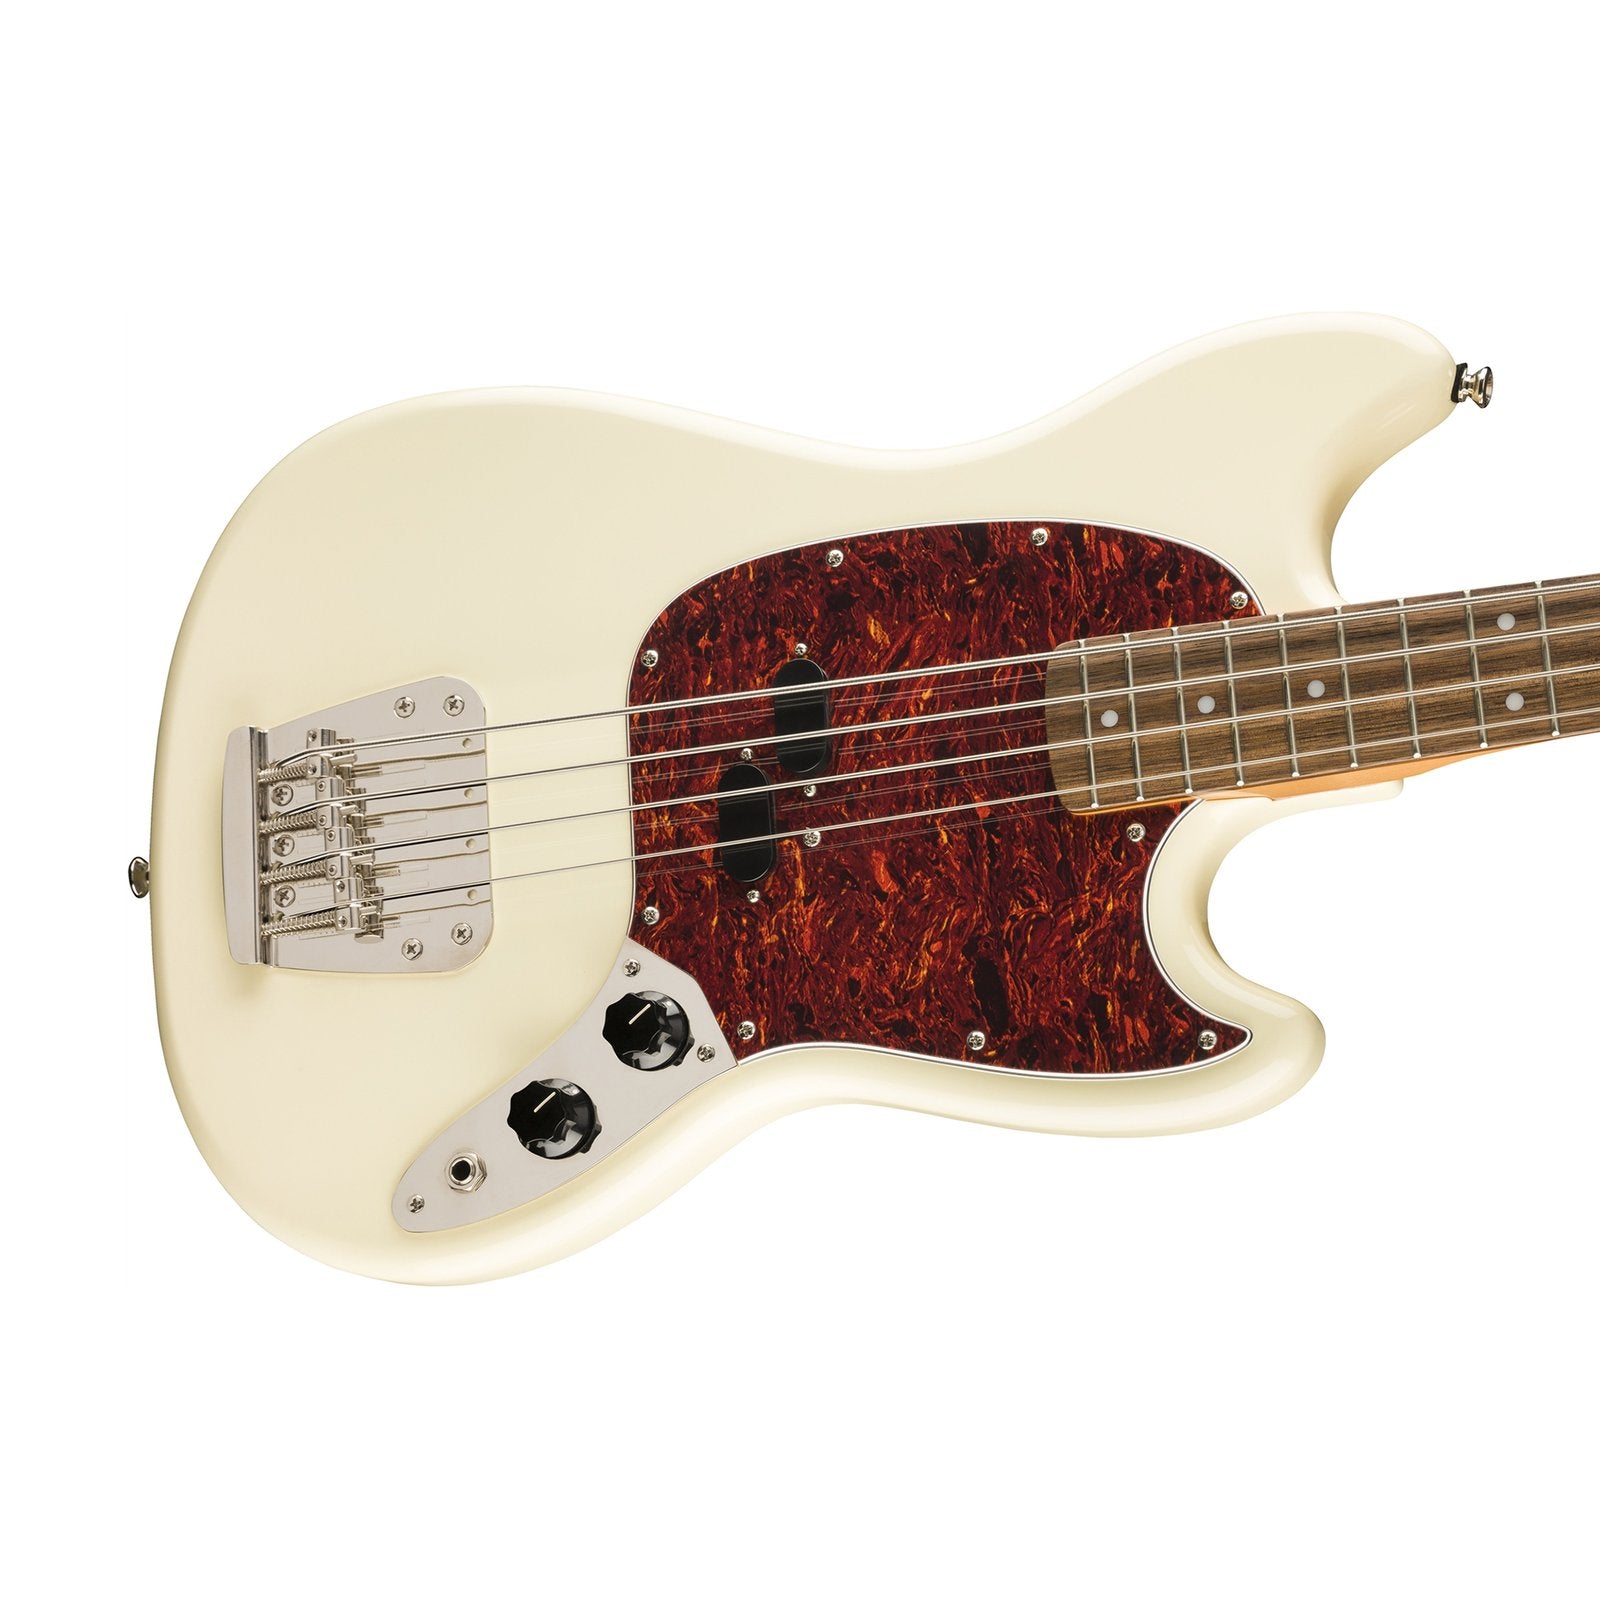 Squier Classic Vibe 60s Mustang Bass Guitar, Laurel FB, Olympic White, SQUIER BY FENDER, BASS GUITAR, squier-by-fender-bass-guitar-037-4570-505, ZOSO MUSIC SDN BHD